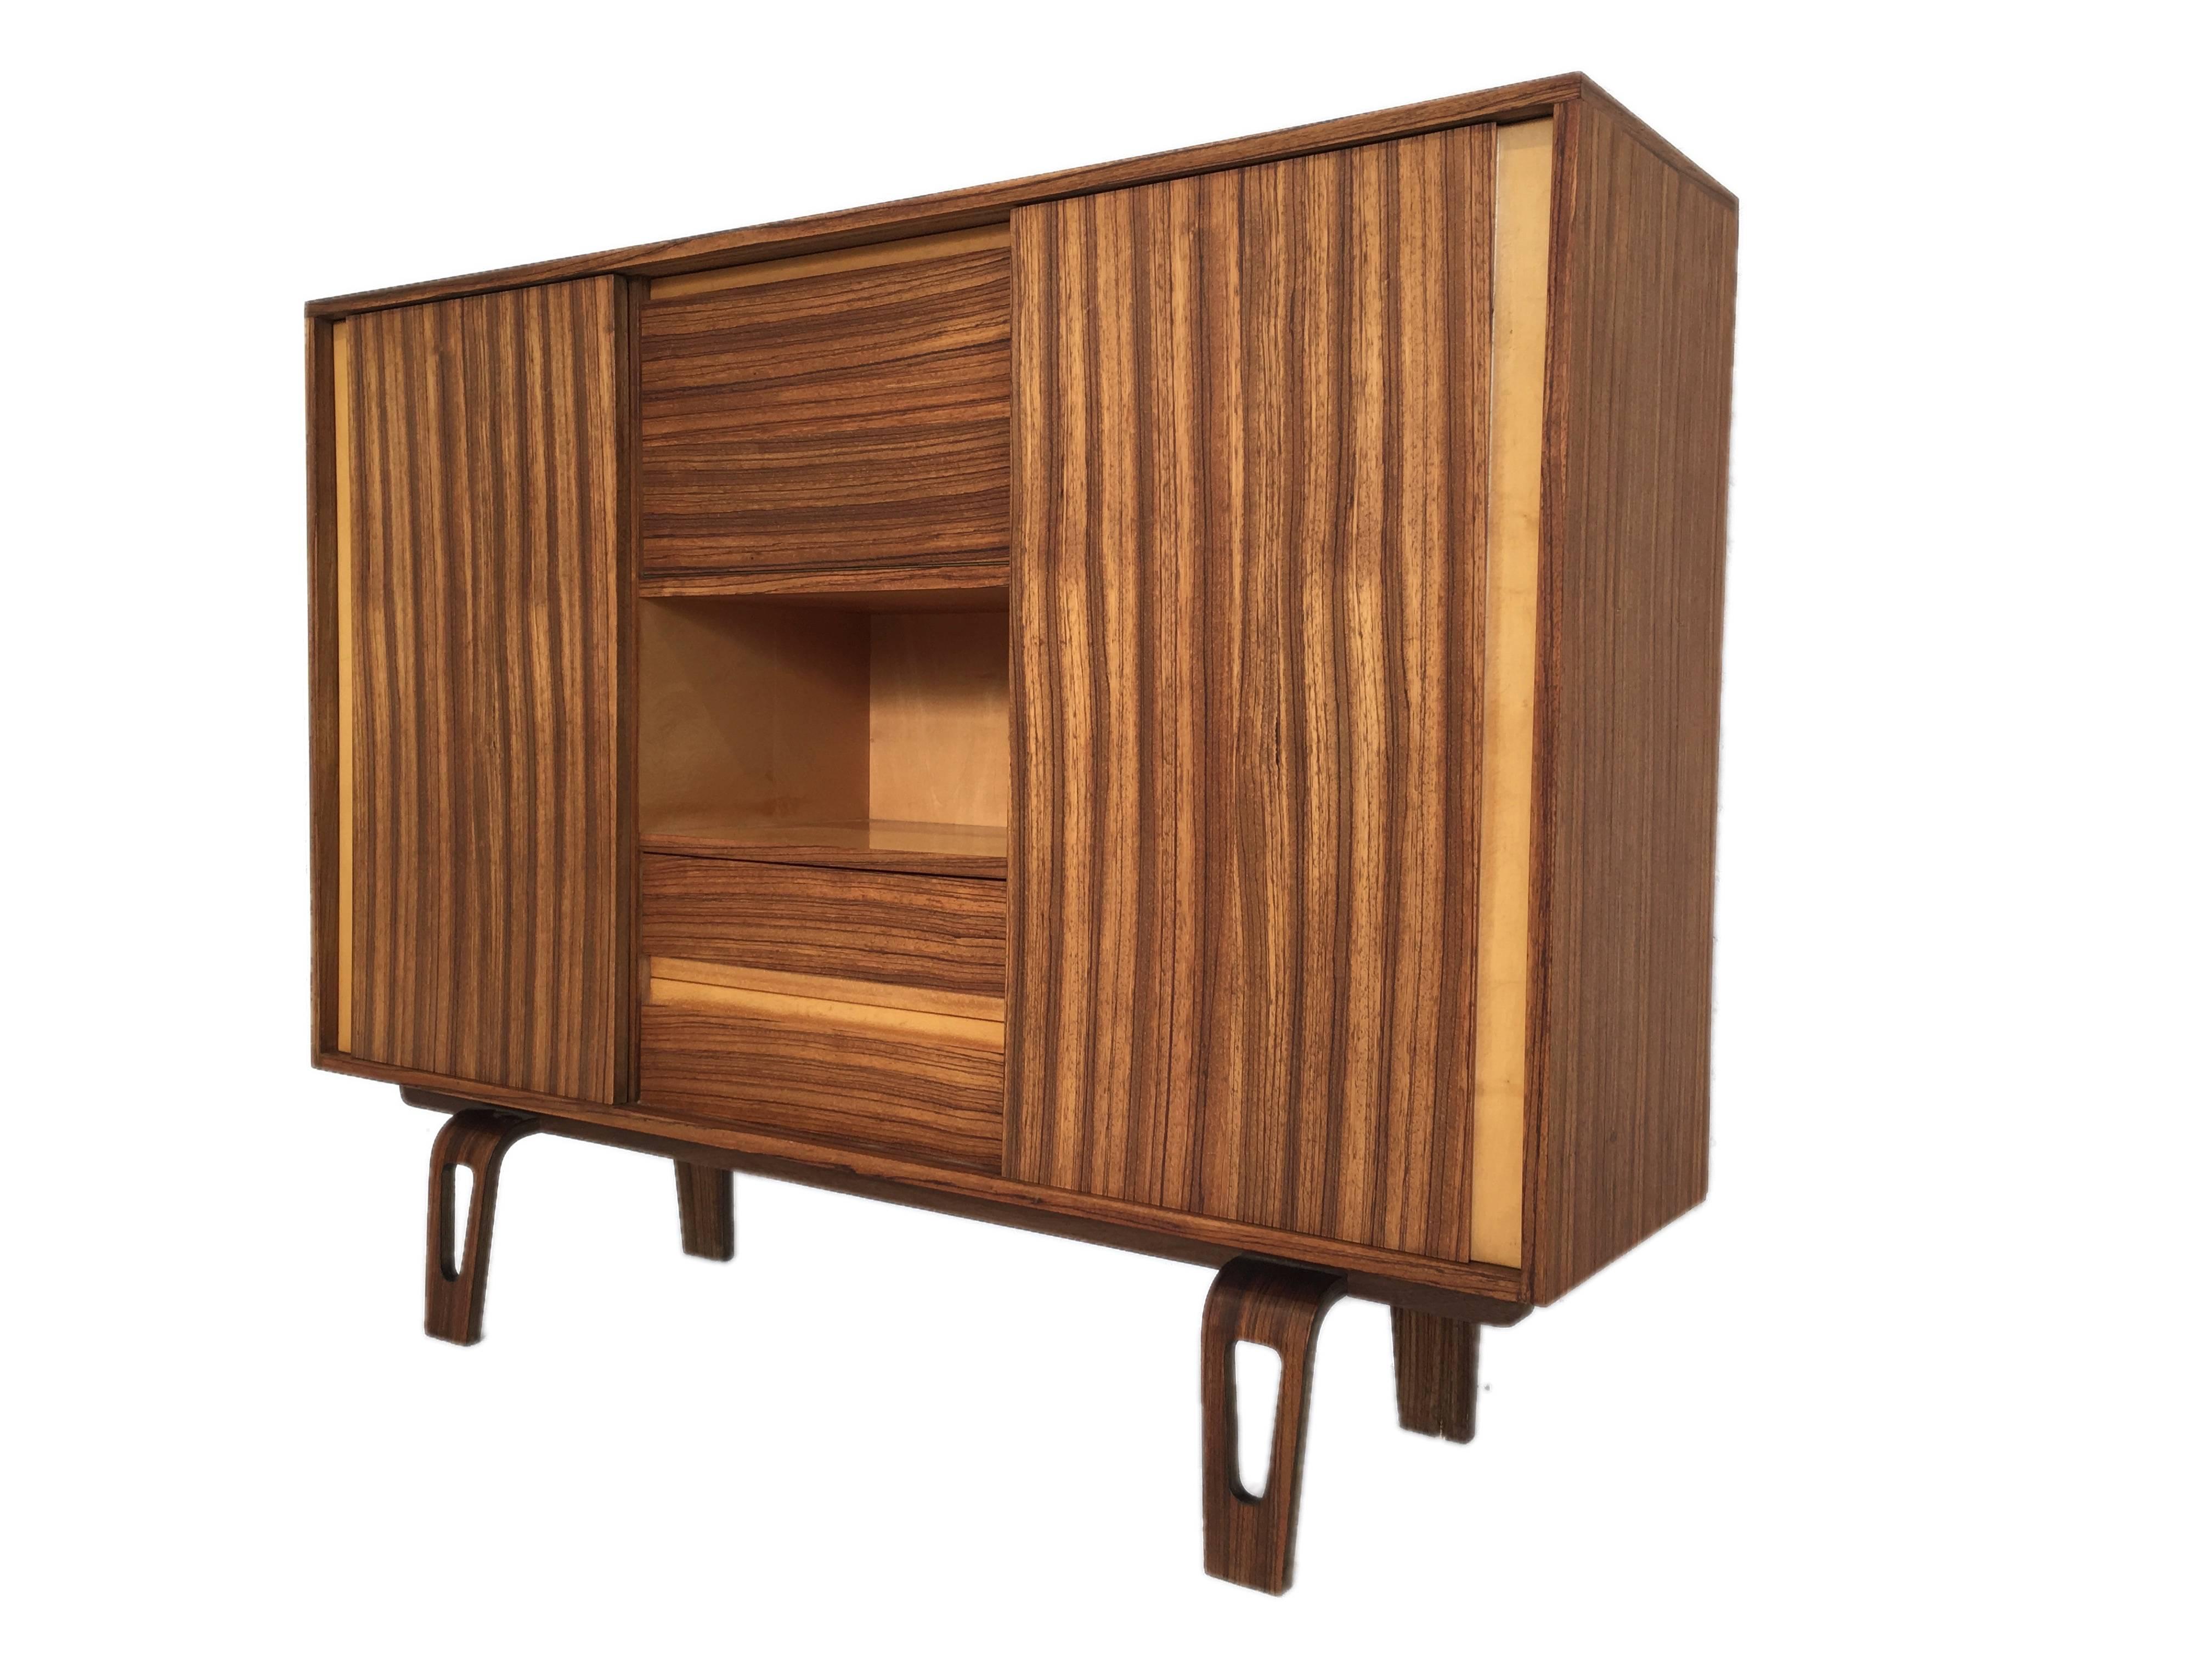 Mid-20th Century Cor Alons High Board Cabinet for Den Boer Gouda, 1950's For Sale